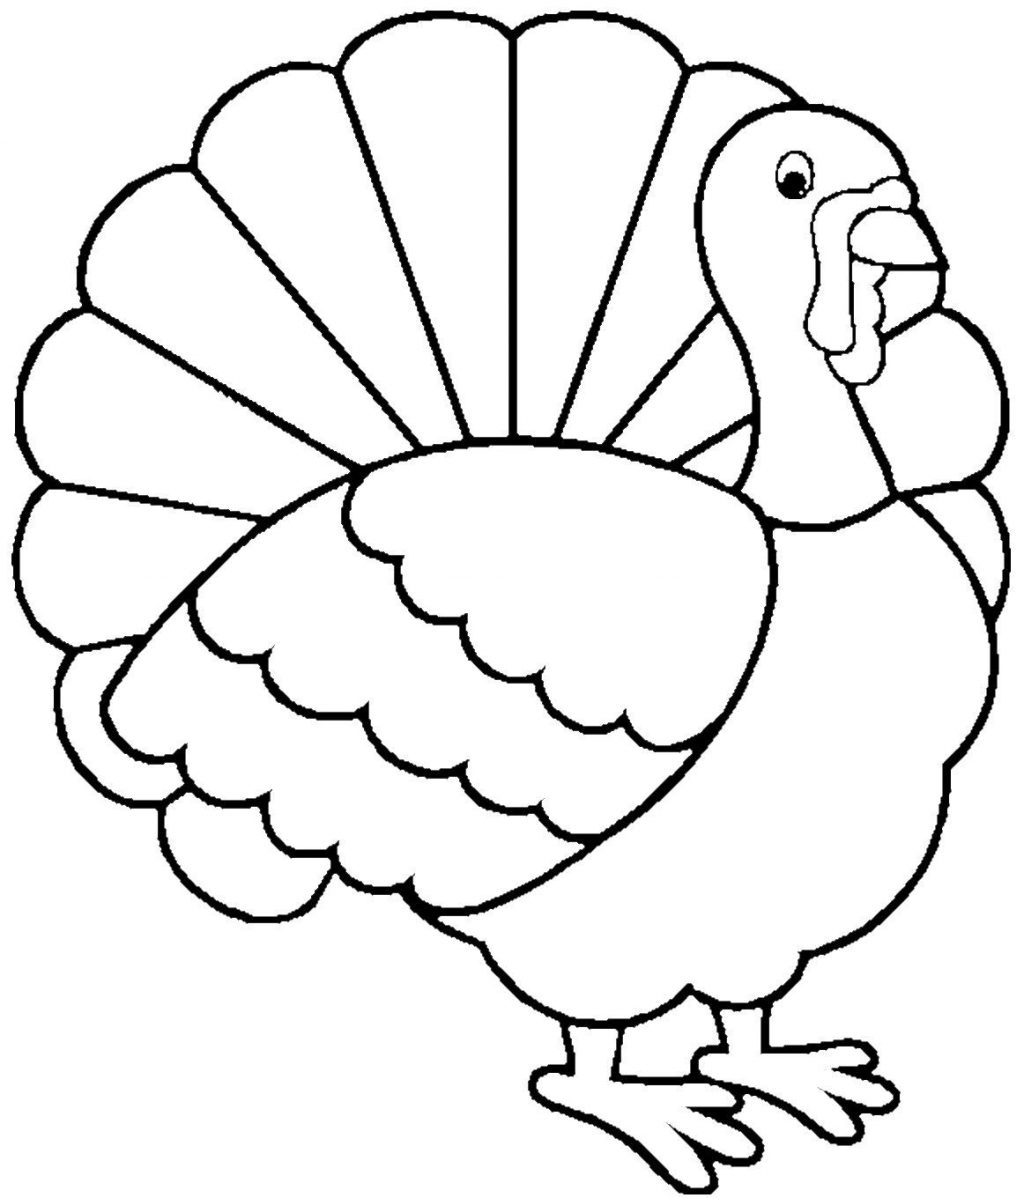 Coloring Pages ~ Coloring Pages Free Turkey To Print Printable Page - Free Printable Turkey